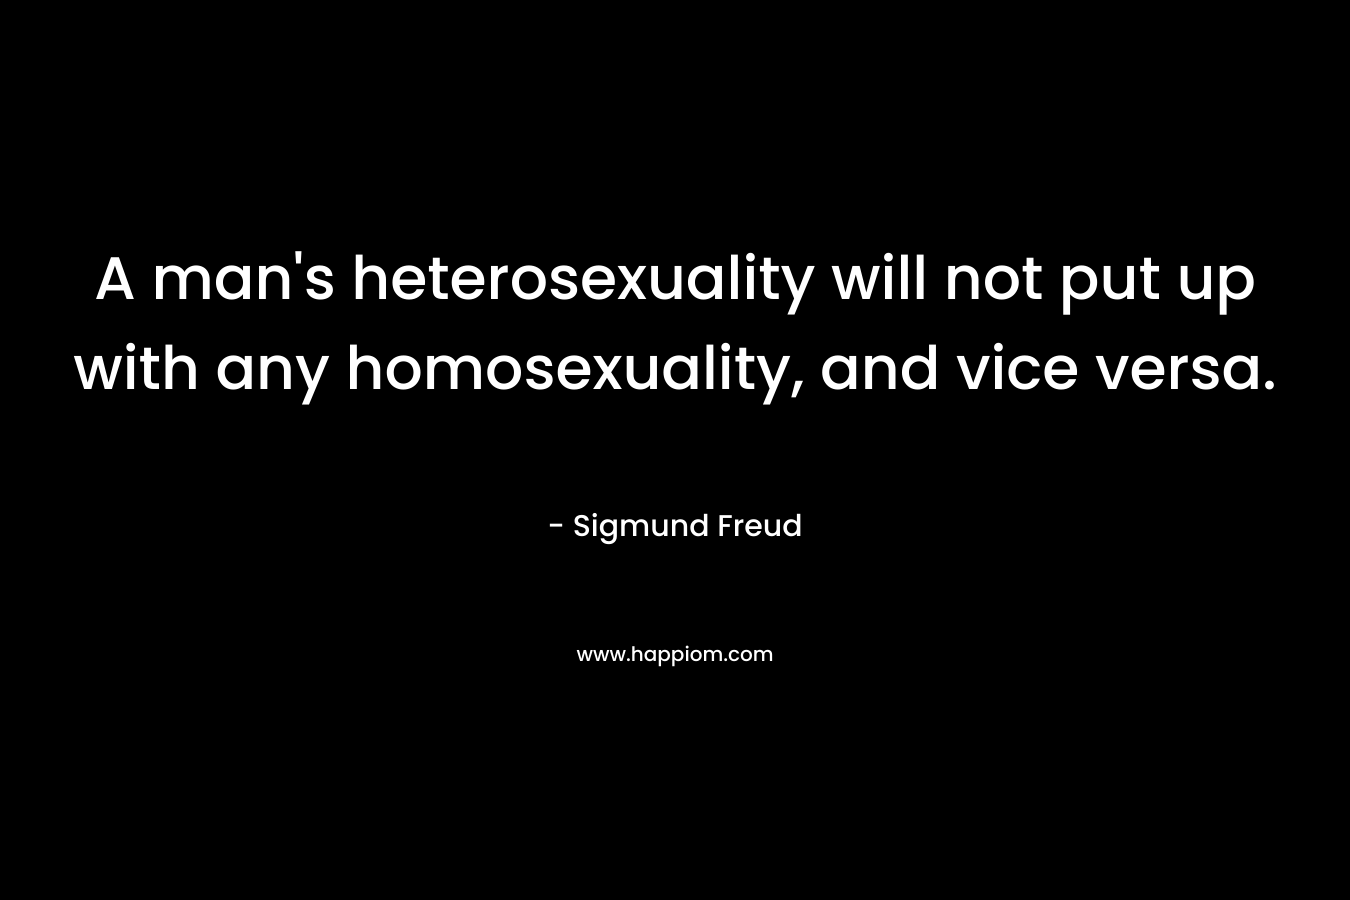 A man’s heterosexuality will not put up with any homosexuality, and vice versa. – Sigmund Freud